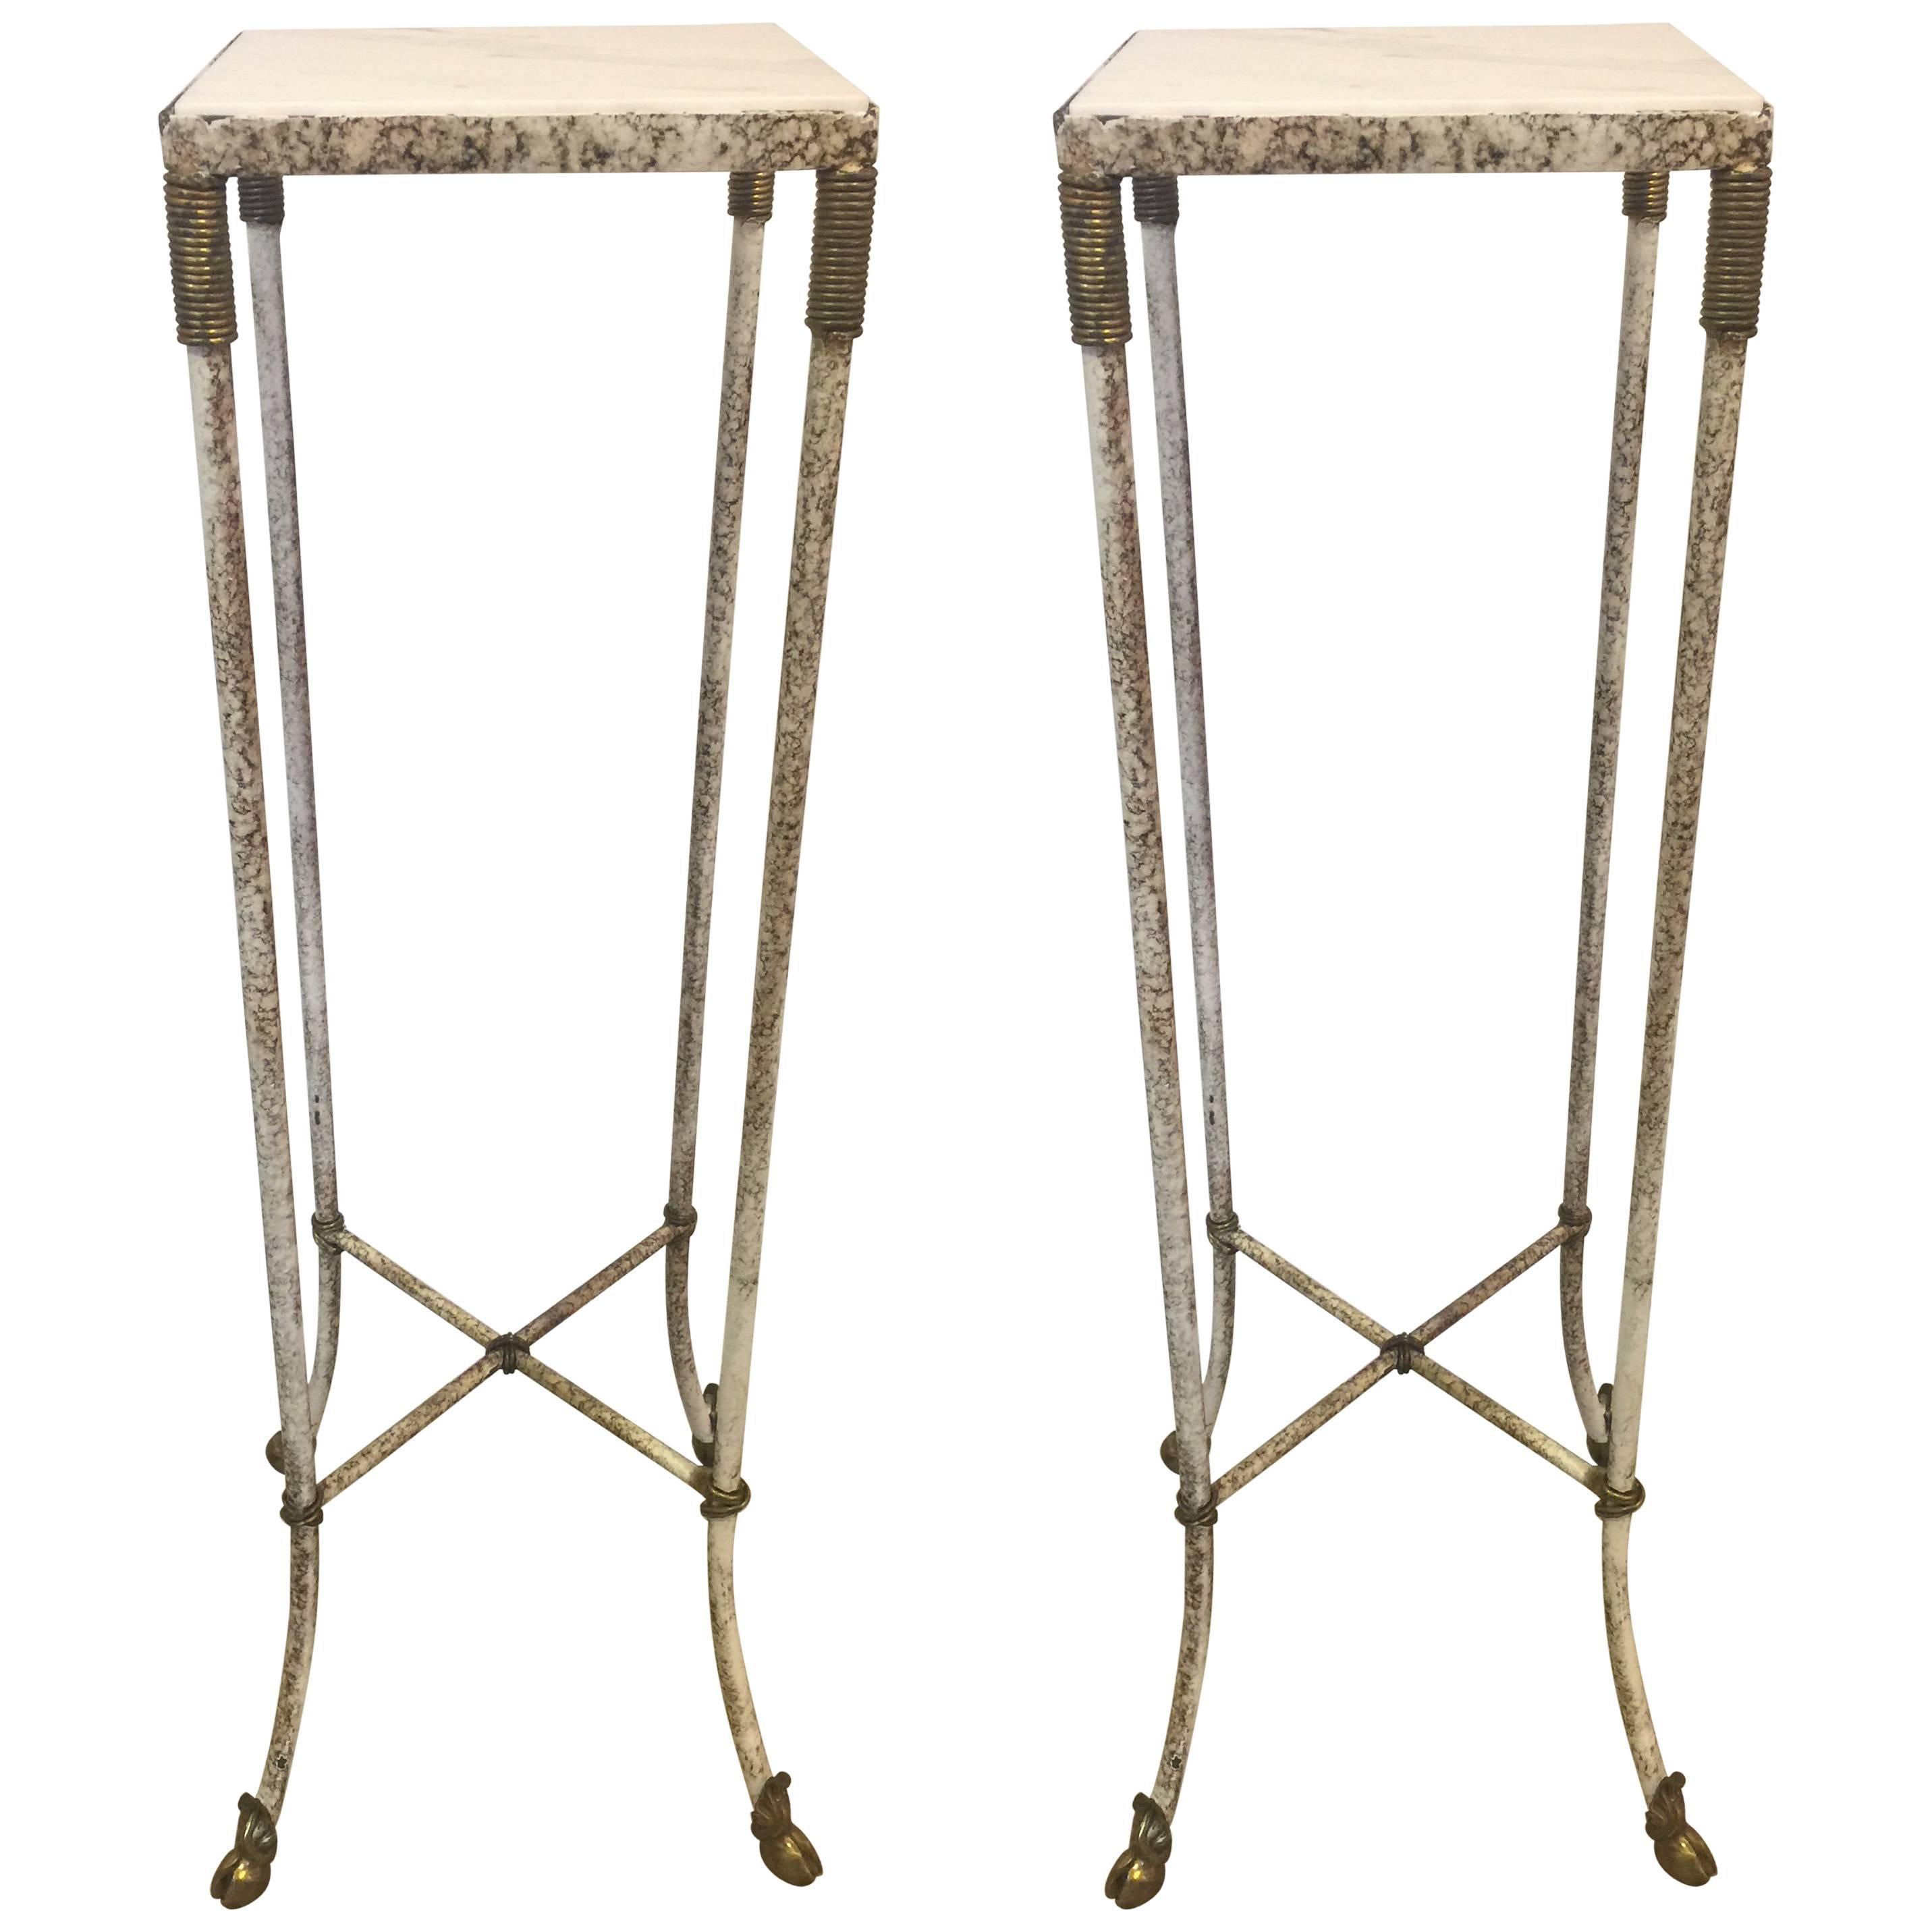 Pair of Regency Style Plant Stands/Pedestals